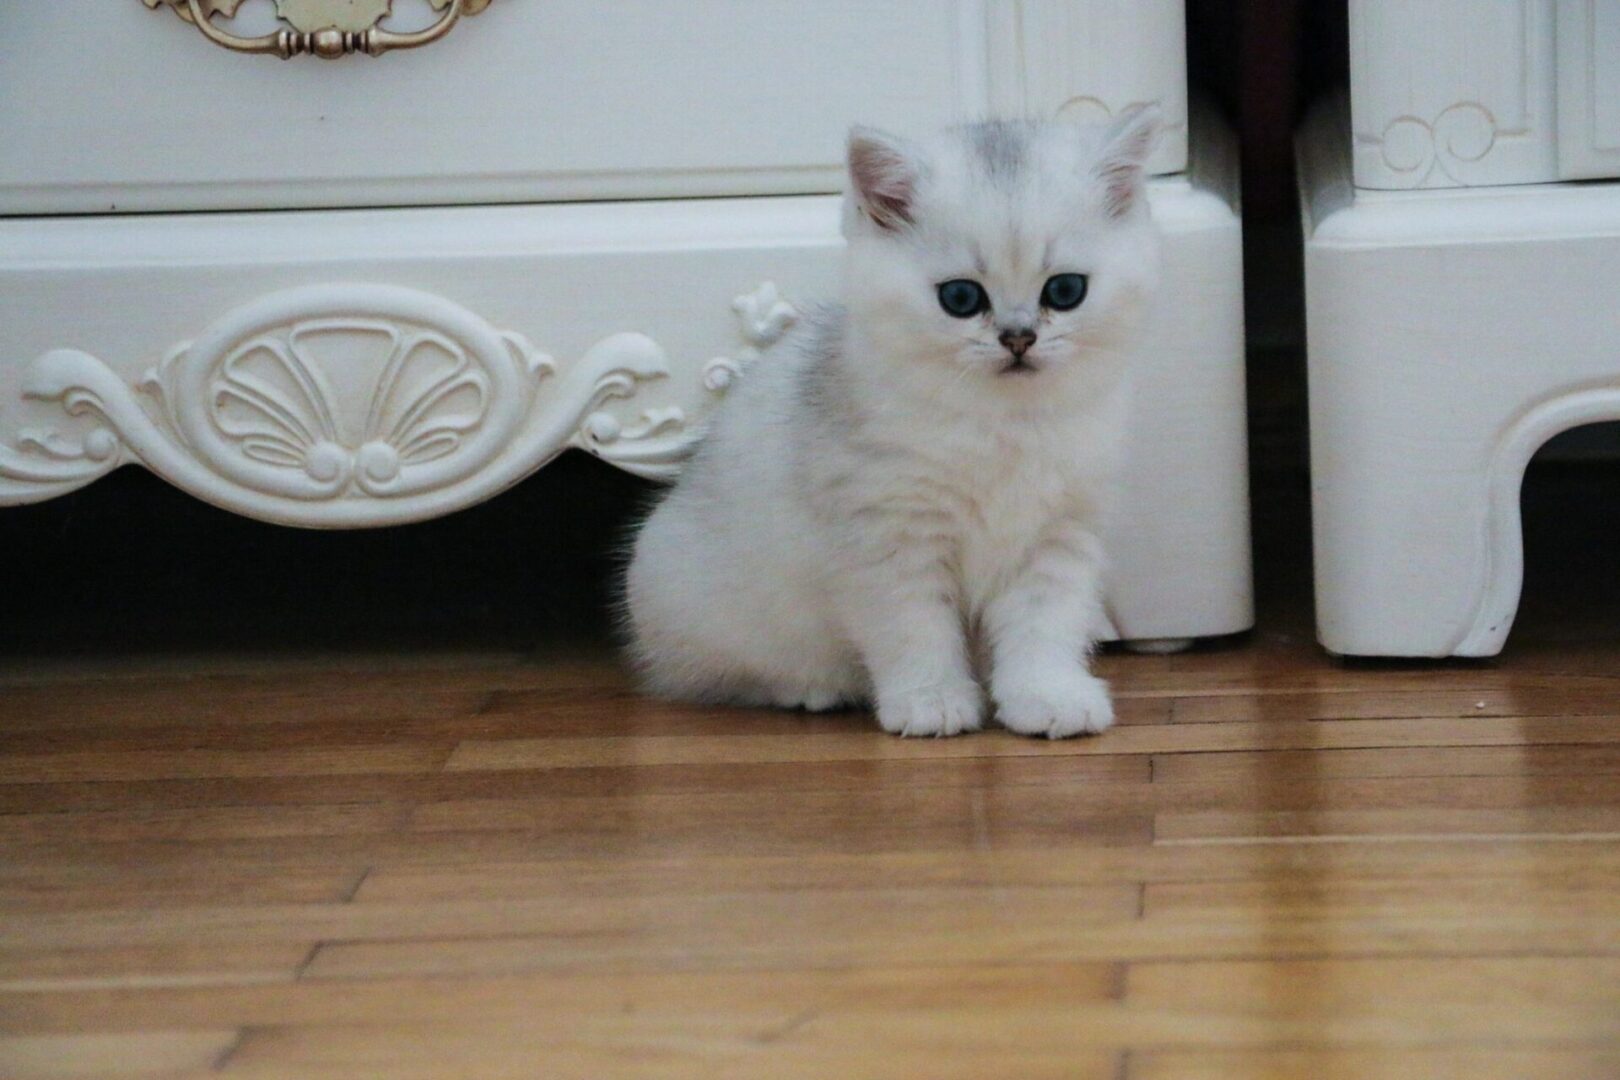 A white cat sitting on the floor next to a door.